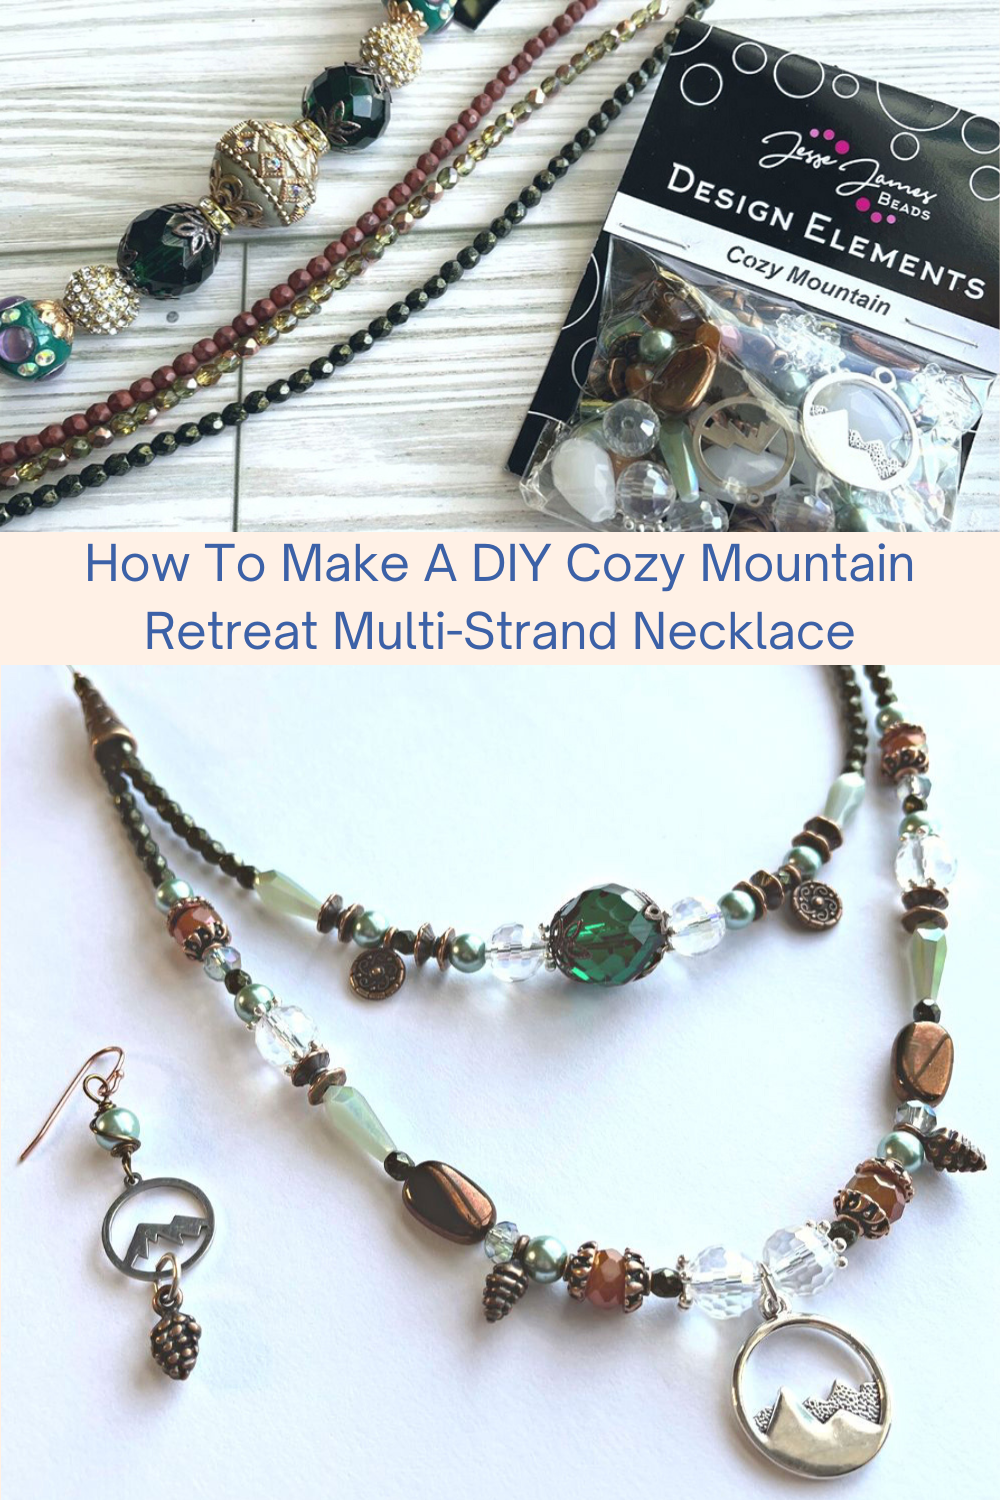 How To Make A DIY Cozy Mountain Retreat Multi-Strand Necklace